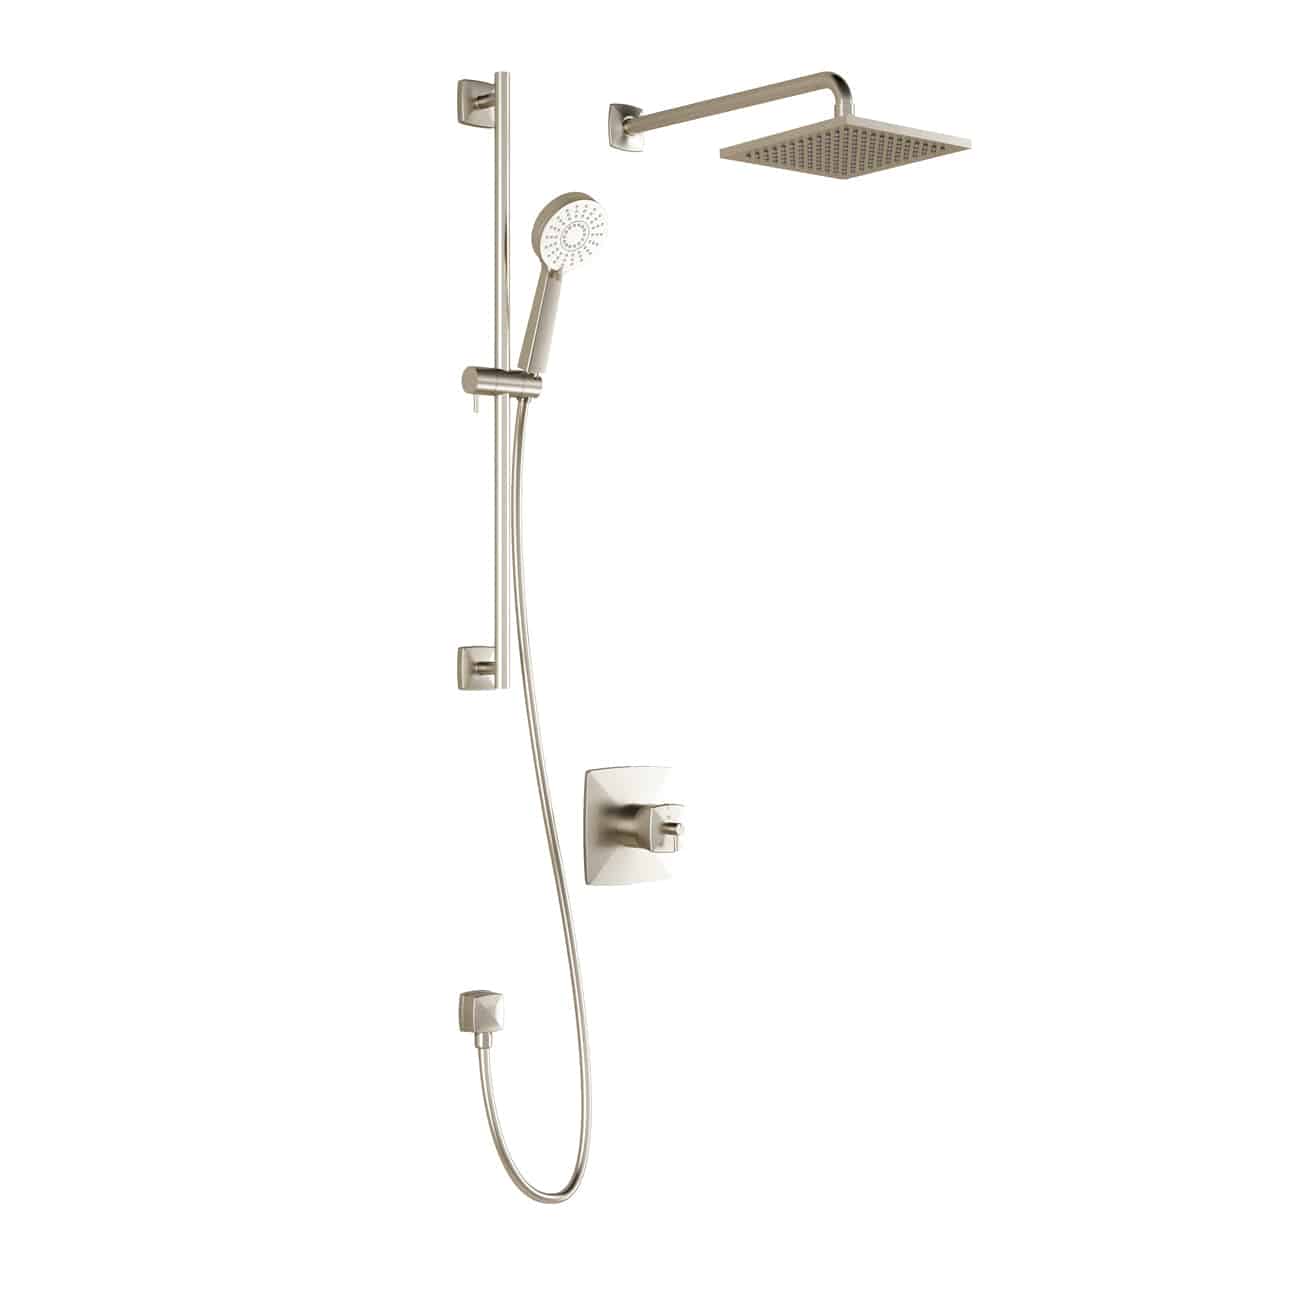 Kalia UMANI TCD1 (Valve Not Included) AQUATONIK T/P Coaxial Shower System with Wall Arm- Brushed Nickel PVD